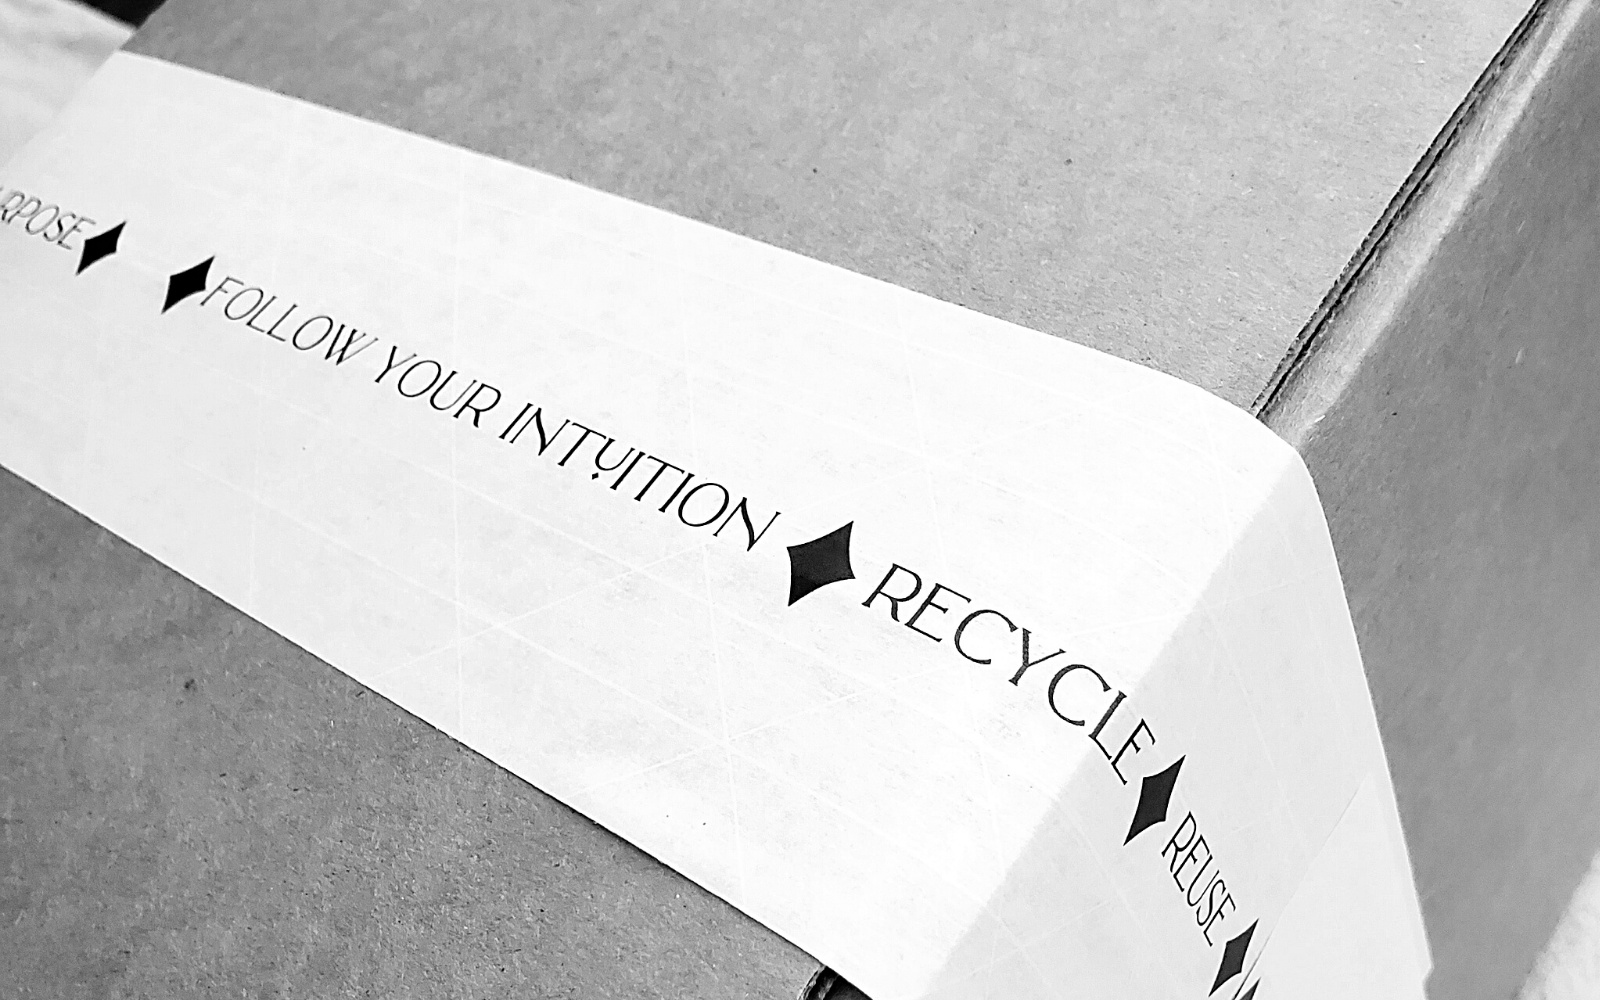 image of sustainable packaging in a recyclable box tapped with sustainable packing tape that says follow your intuition, recycle, reuse, repurpose.